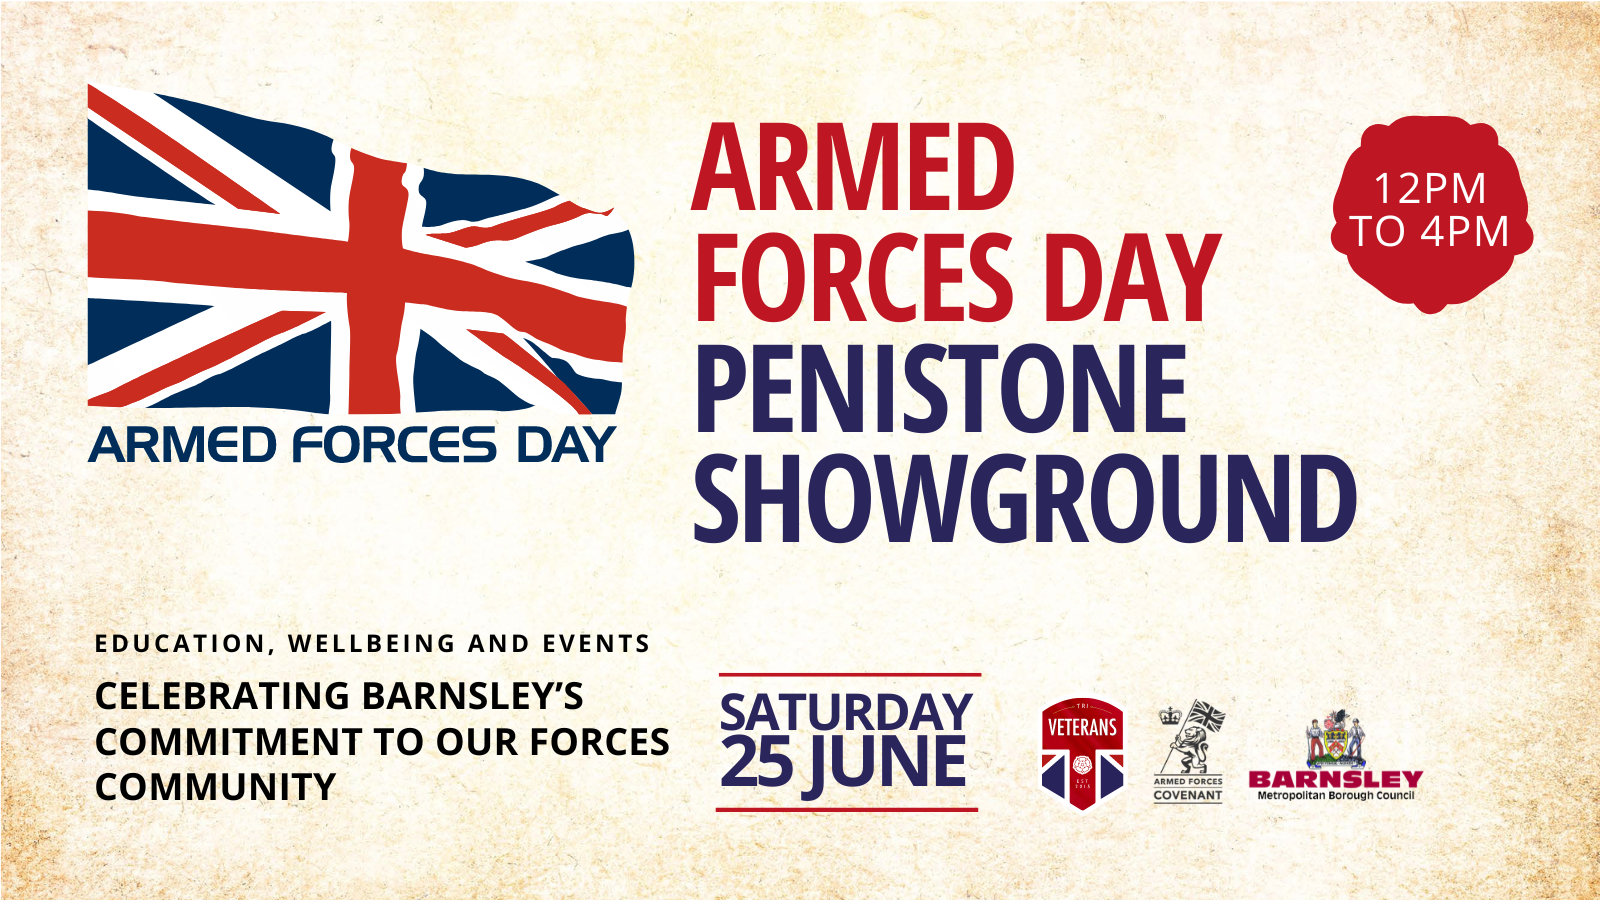 Armed Forces Day at Penistone Showground. Saturday 25 June from 12pm to 4pm. Celebrating Barnsley's commitment to our forces community..png